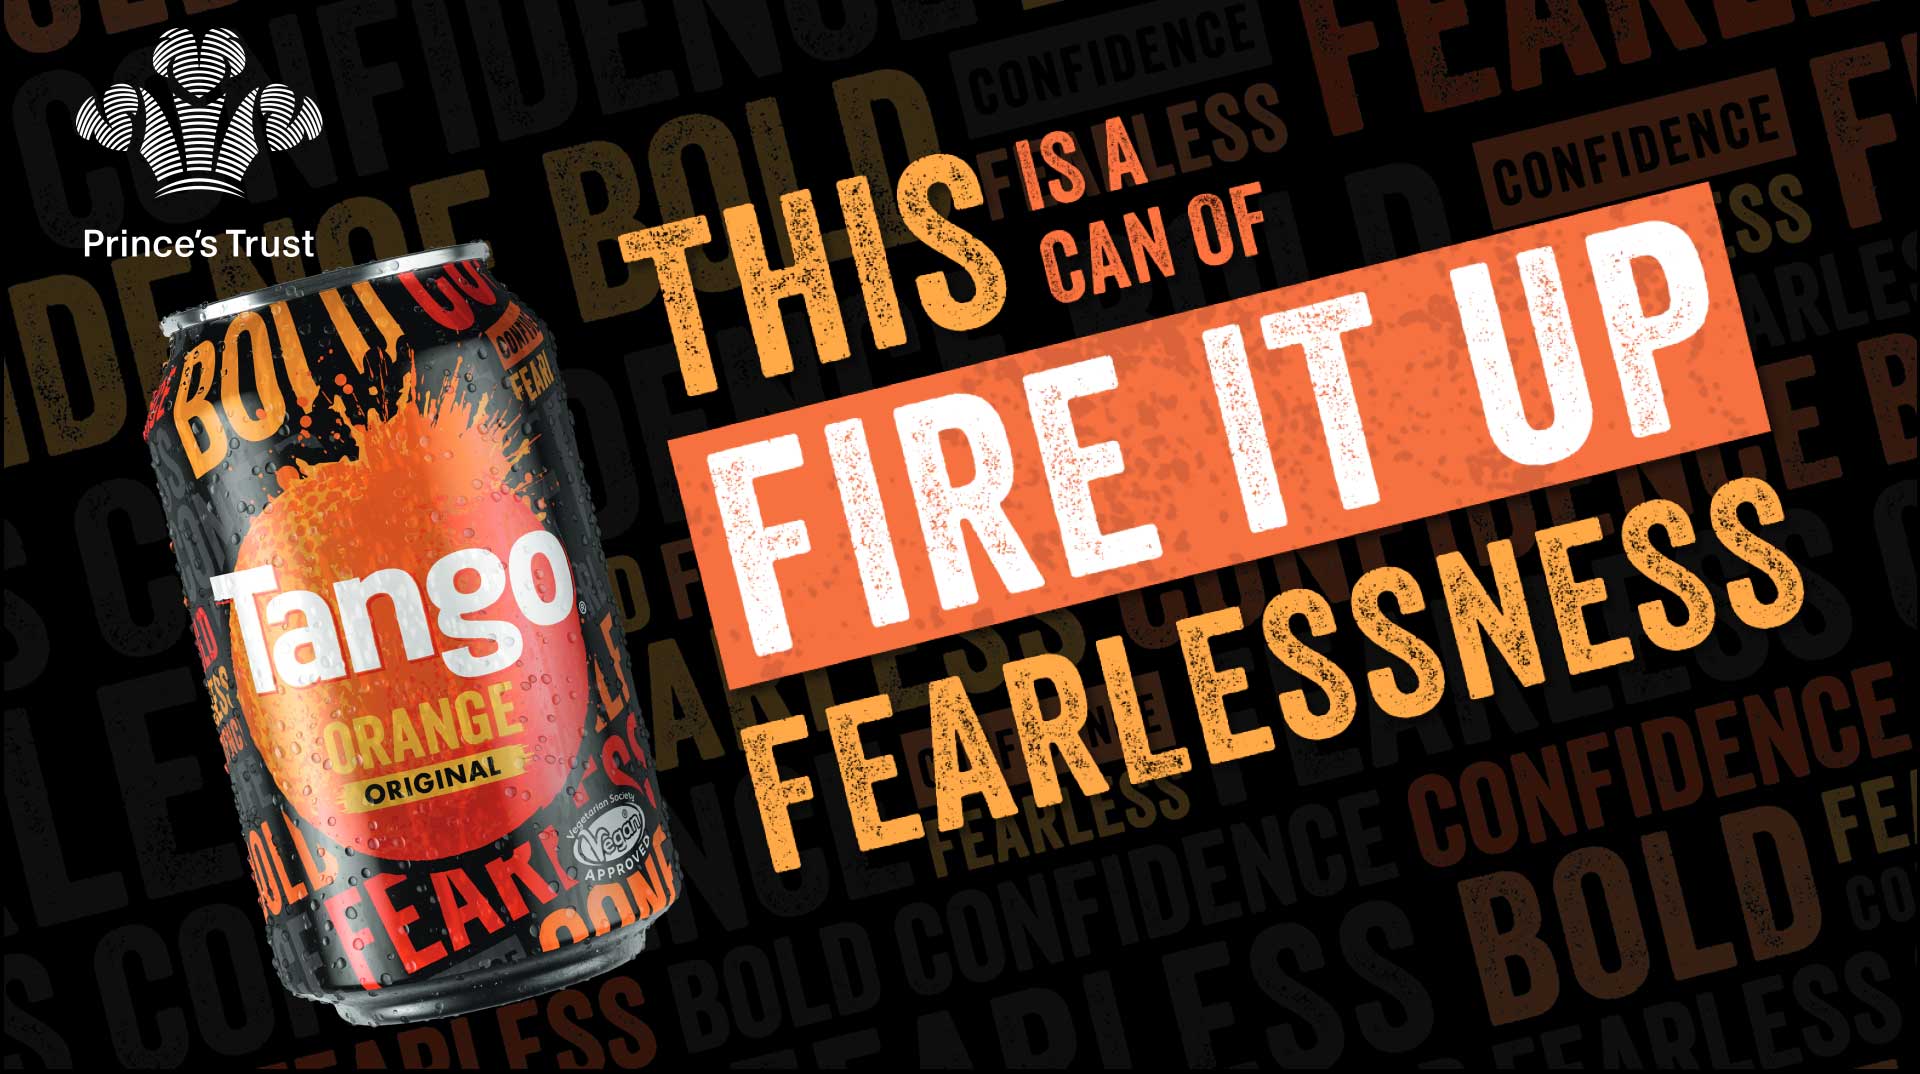 This Is A Can Of Fire It Up Fearlessness